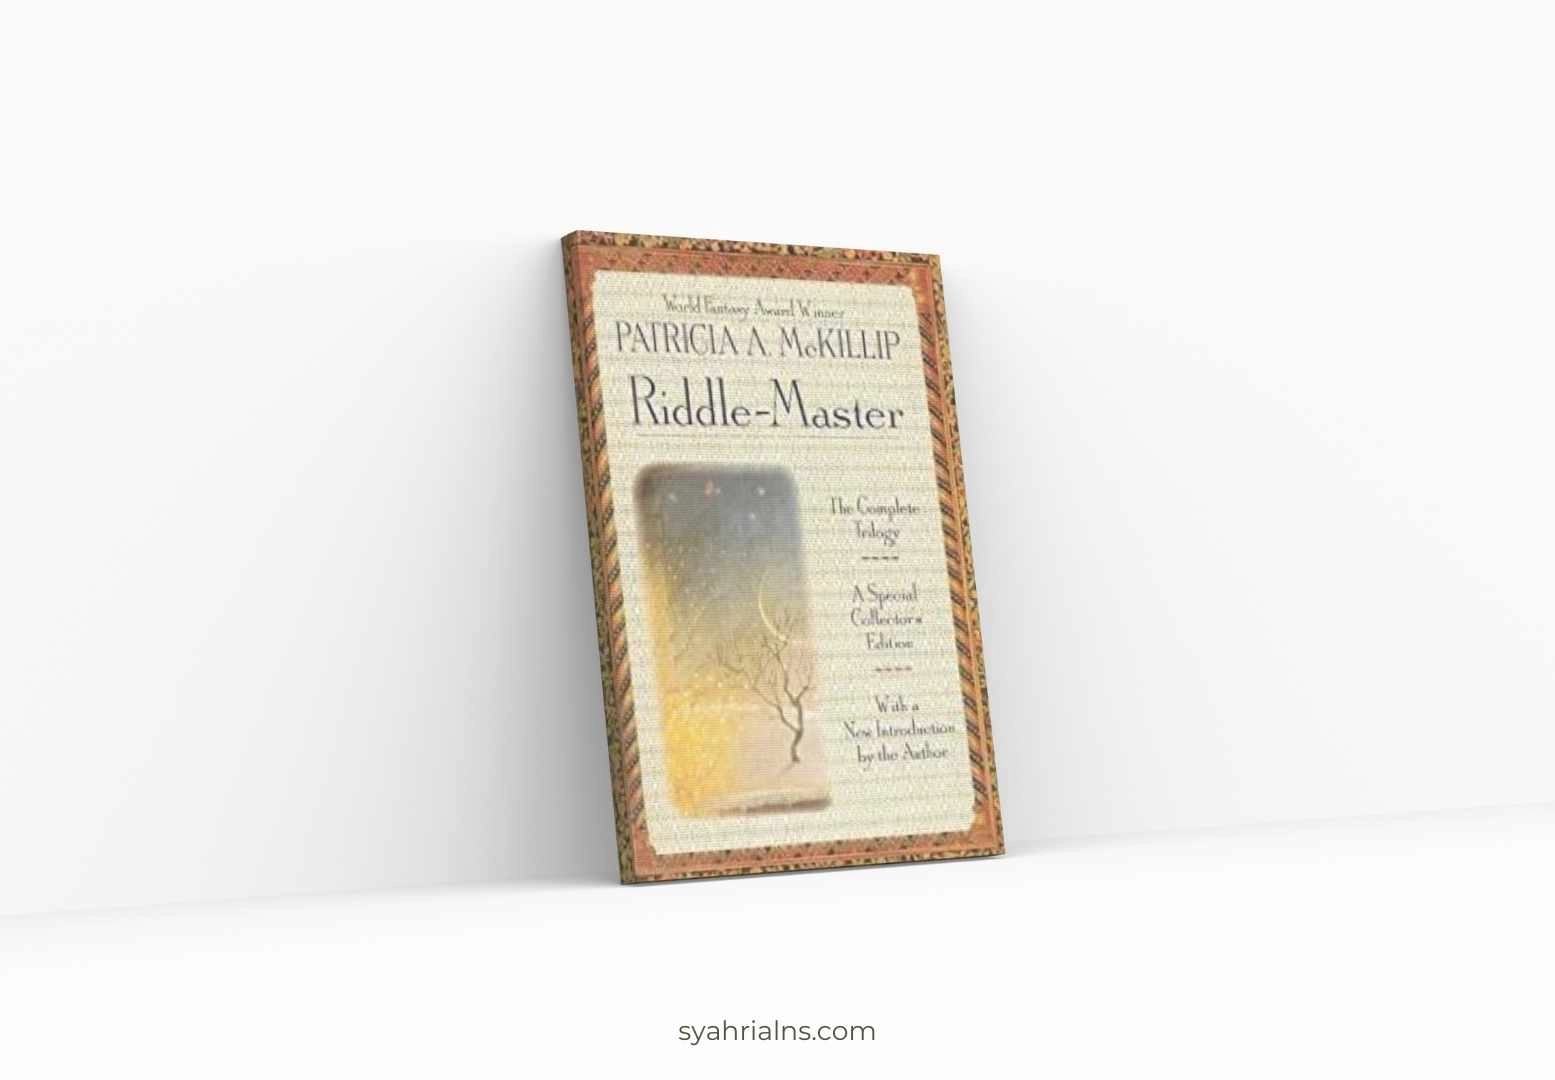 Riddle-Master series by Patricia A. McKillip